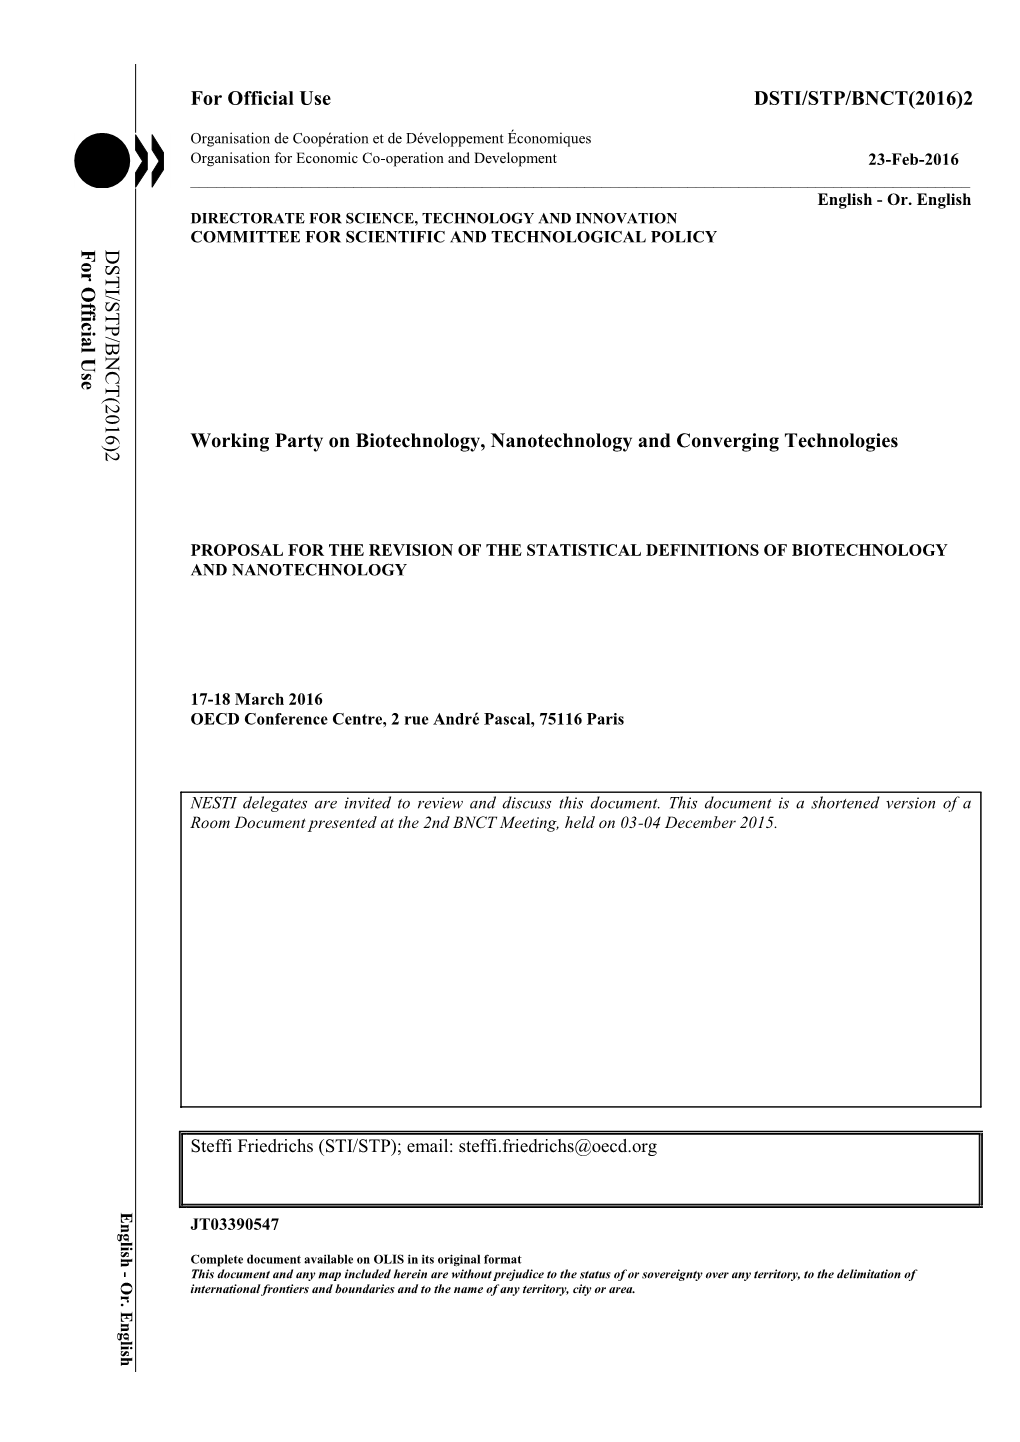 Proposal for the Revision of the Statistical Definitions of Biotechnology and Nanotechnology